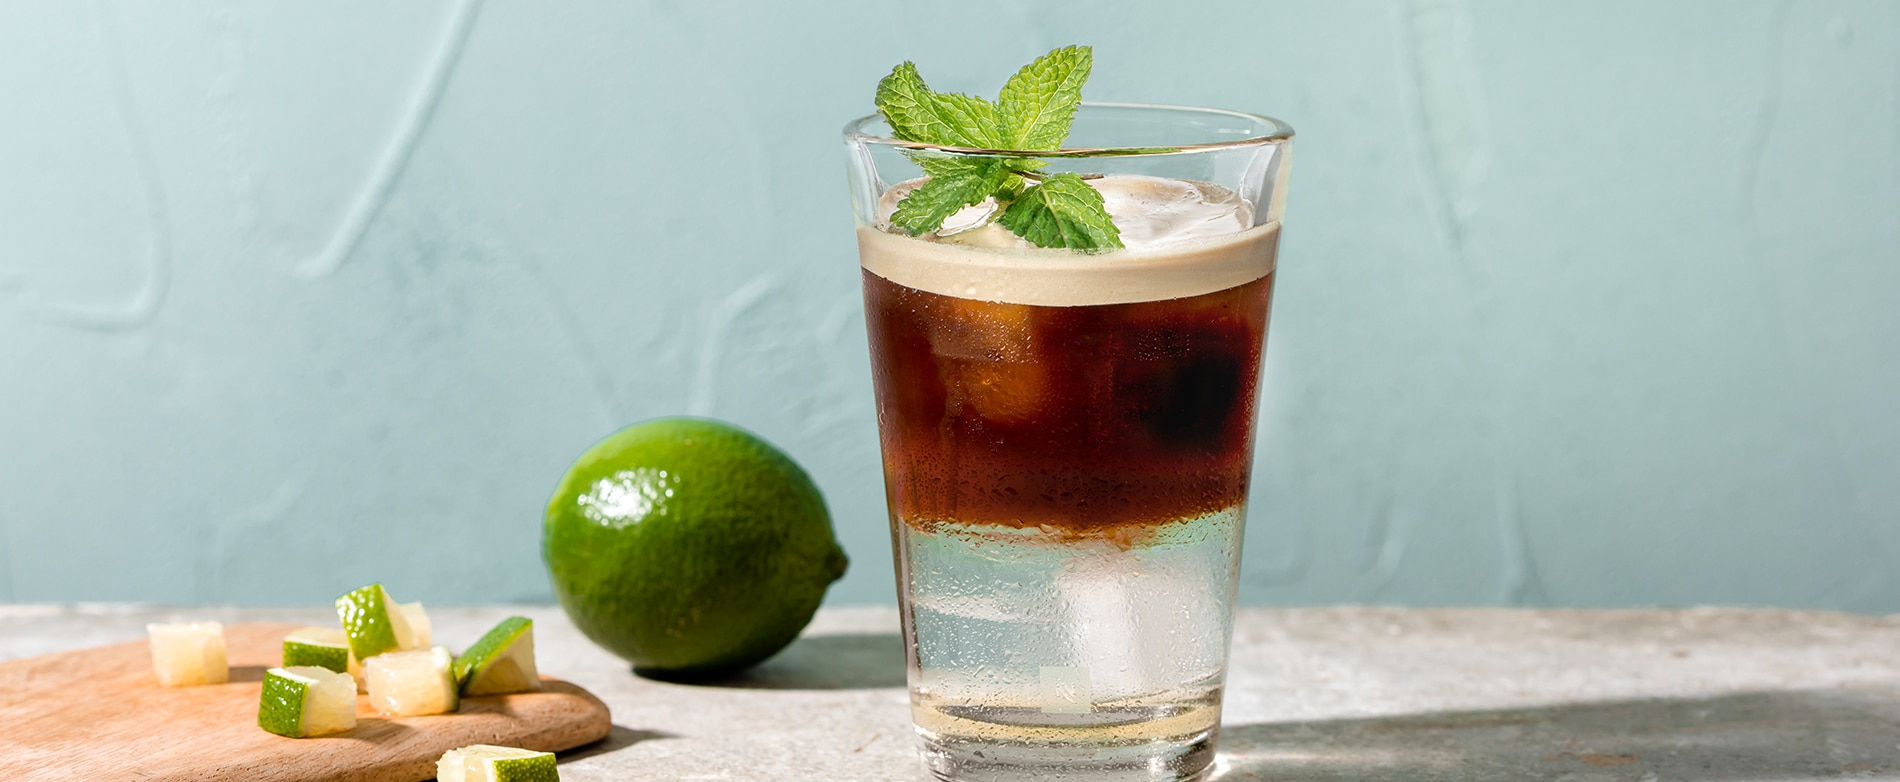 Iced summer coffees recipes